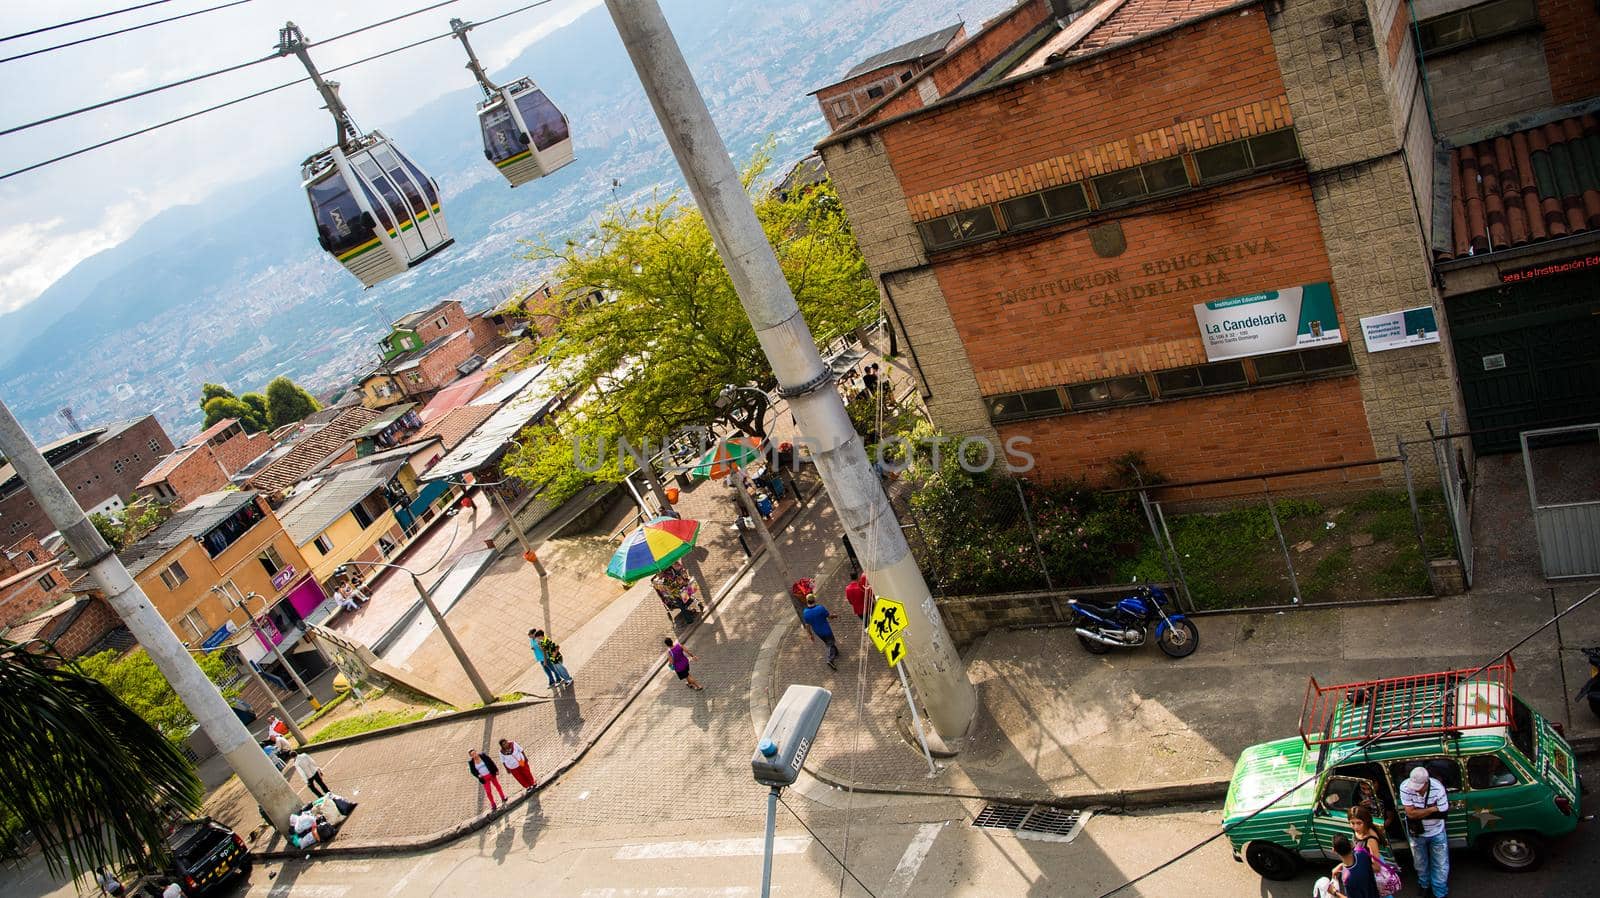 Cable cars in transit in Medellin, Colombia.